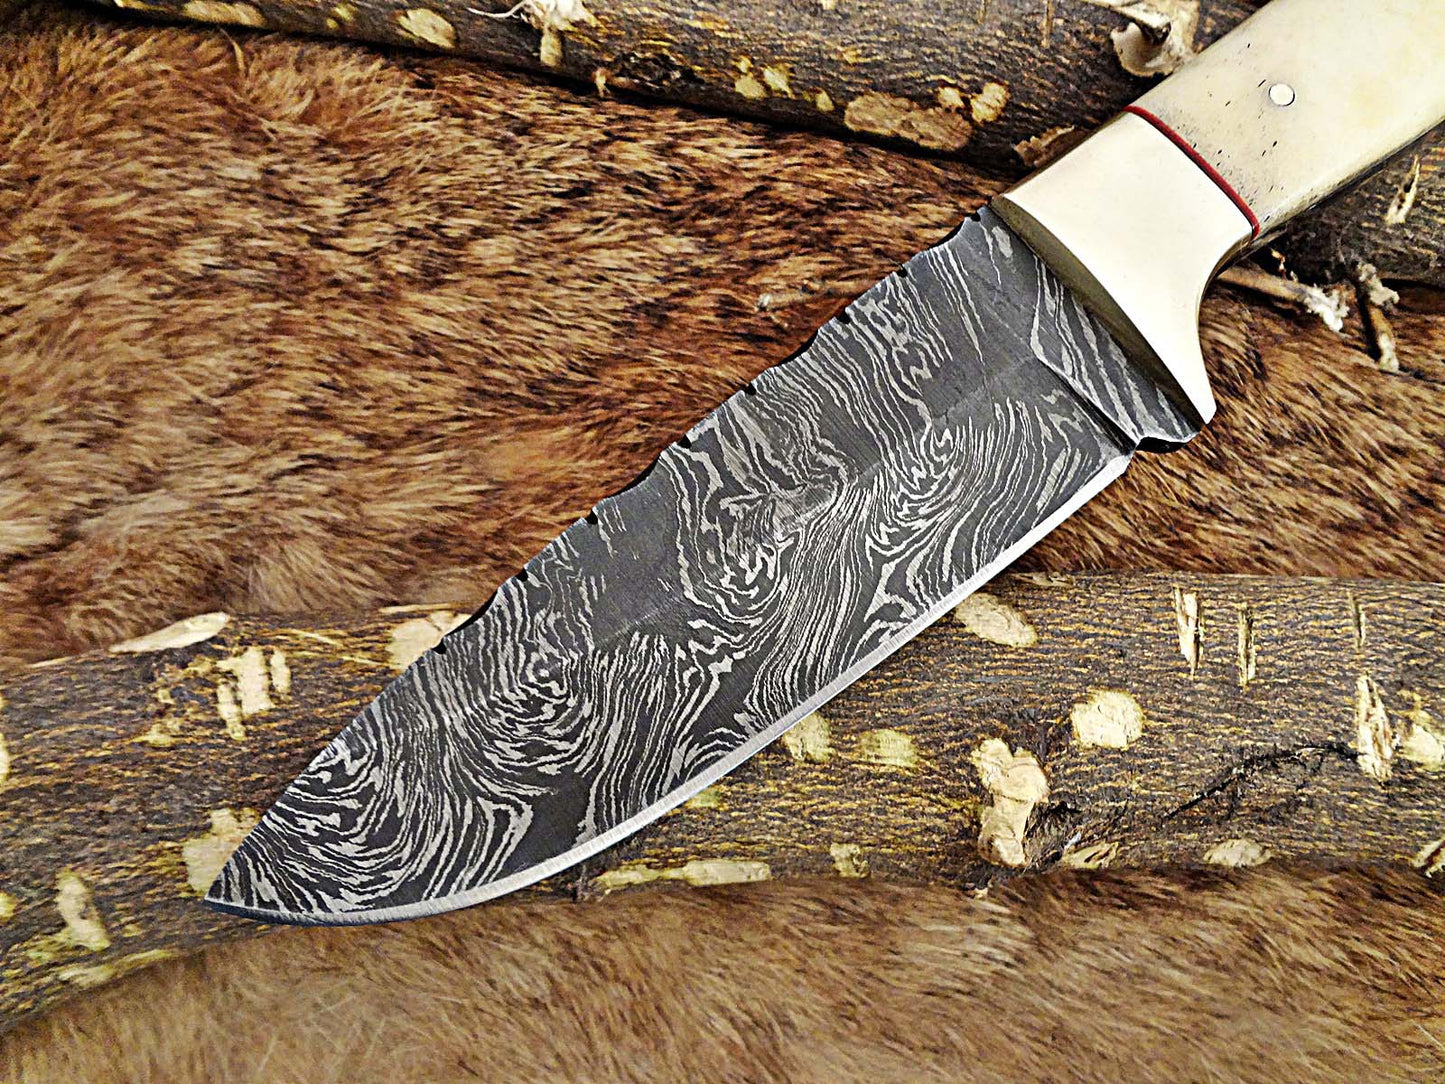 9" Damascus steel skinning knife, 4.5" full tang blade, Available in White and Red colors,  includes Cow hide Leather sheath